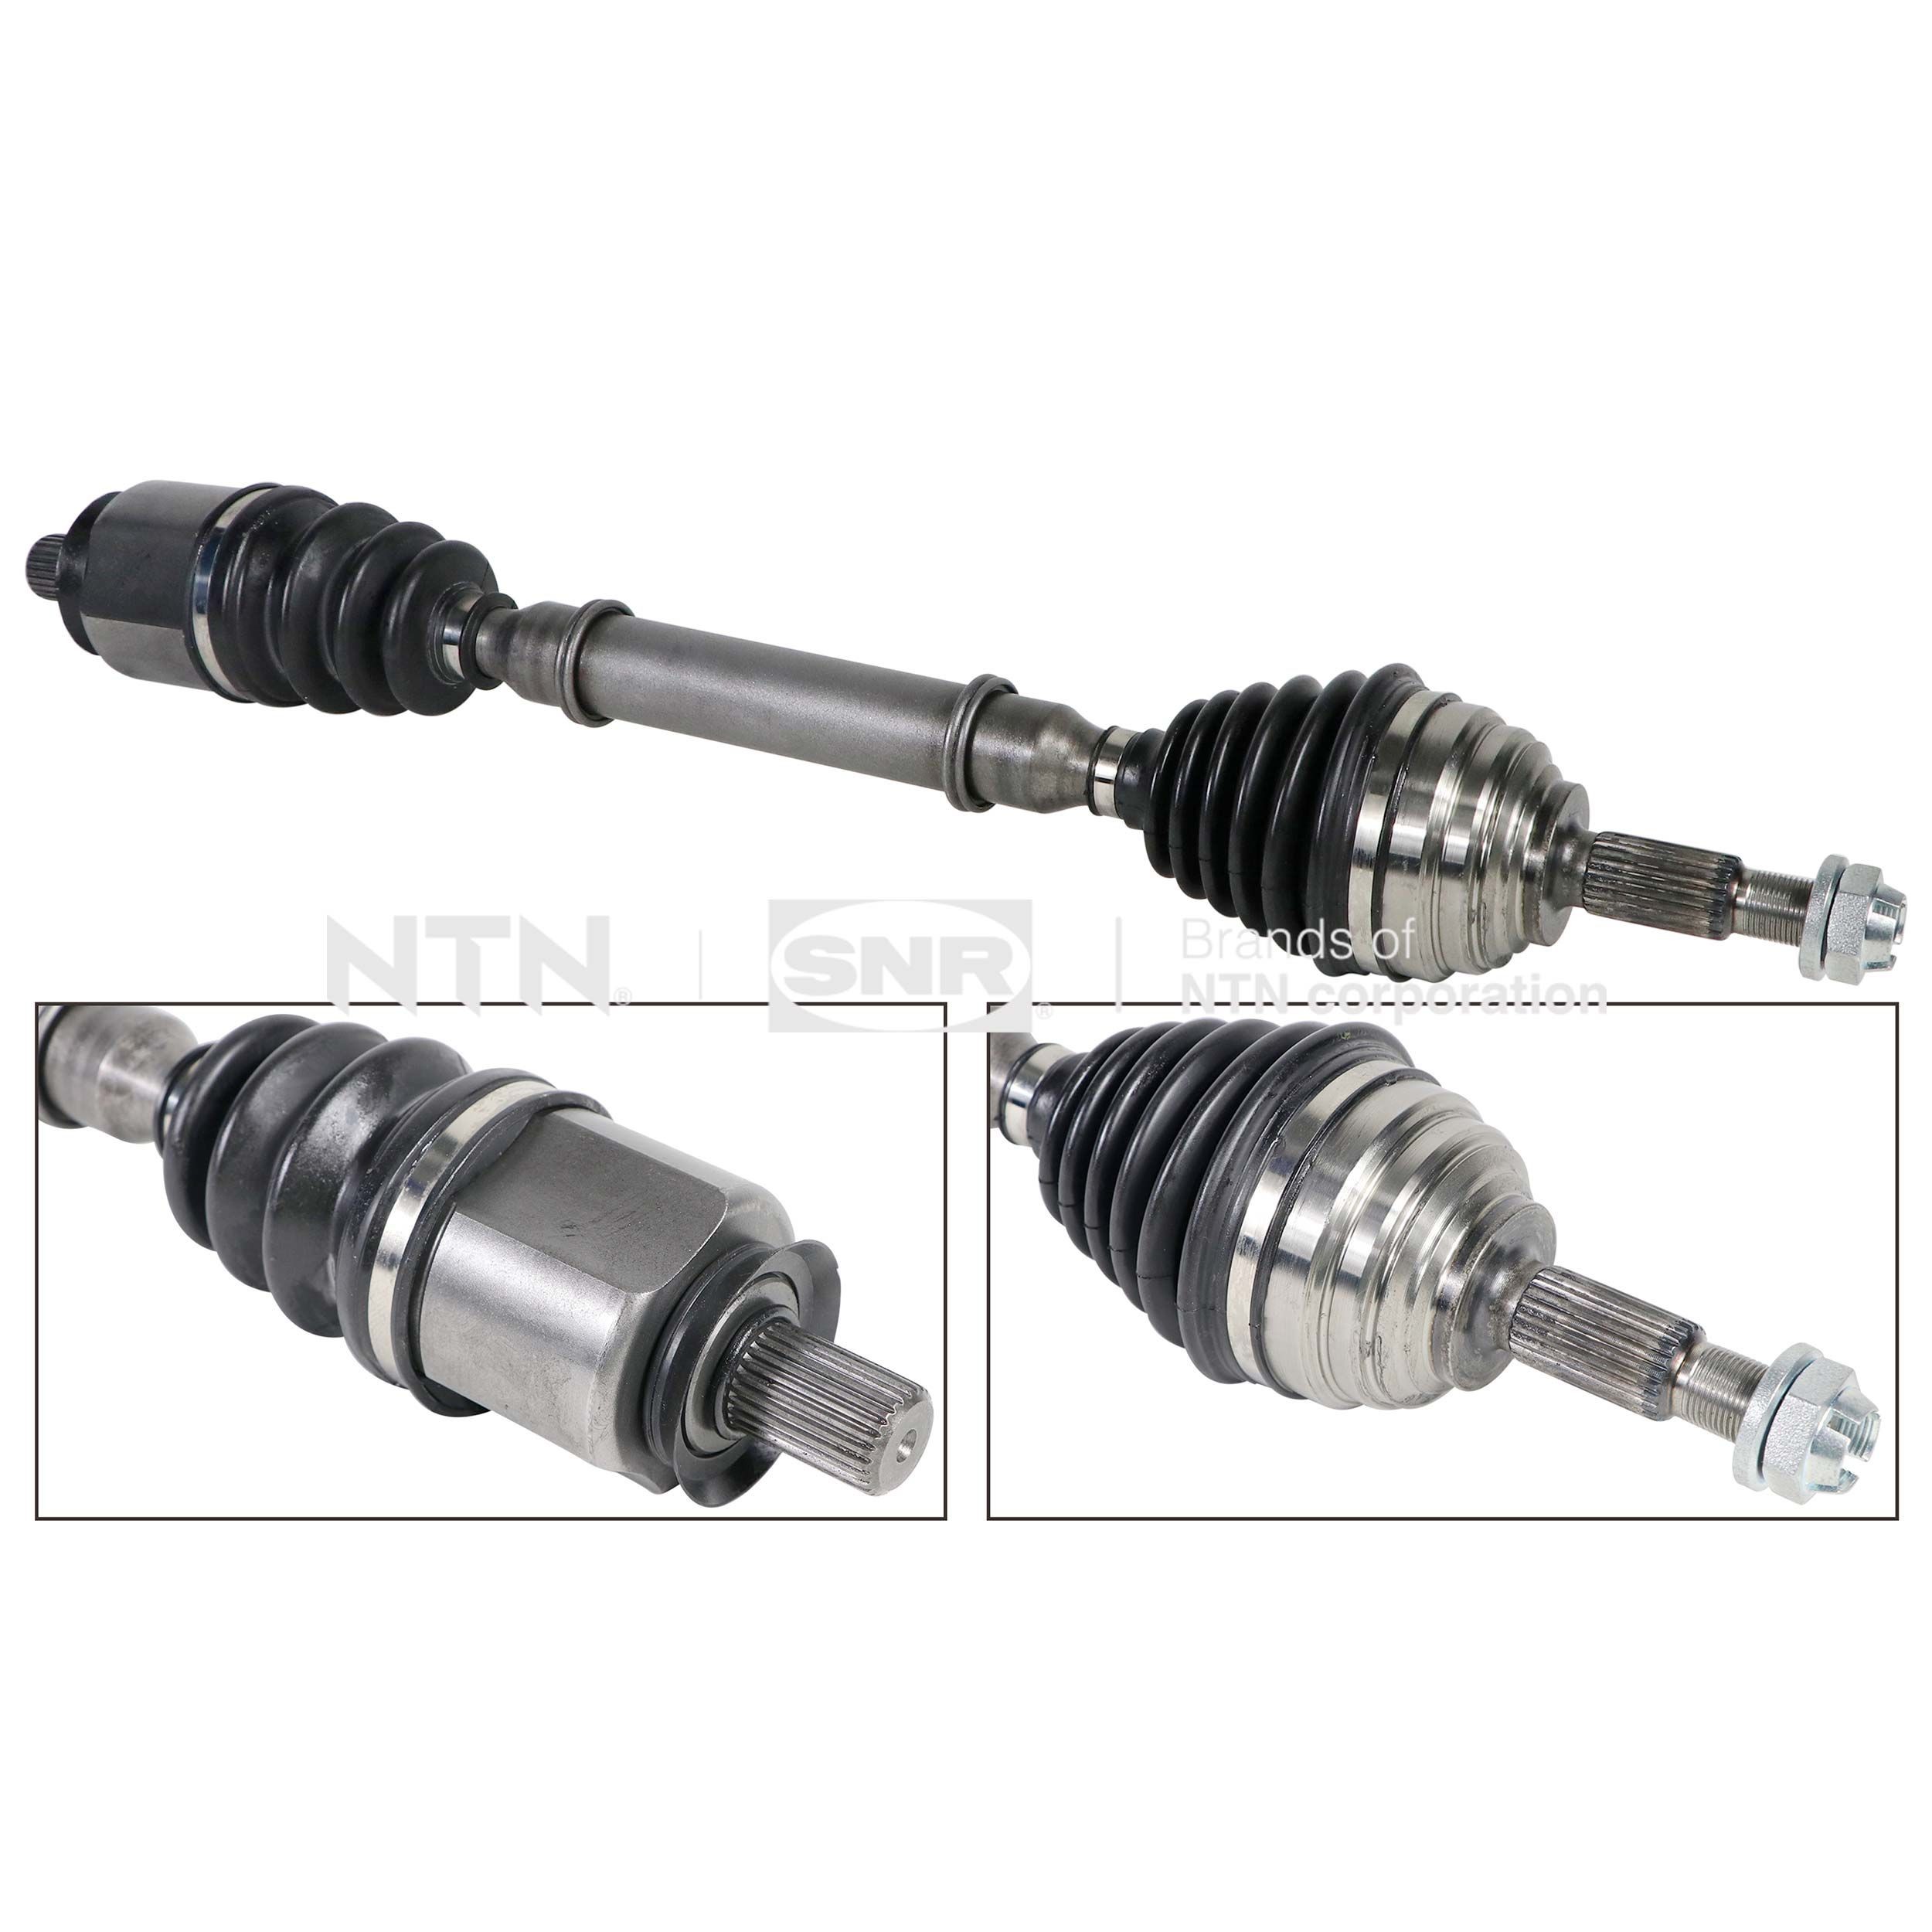 SNR Front Axle Left, 668, 652mm Length: 668, 652mm, External Toothing wheel side: 23 Driveshaft DK55.086 buy